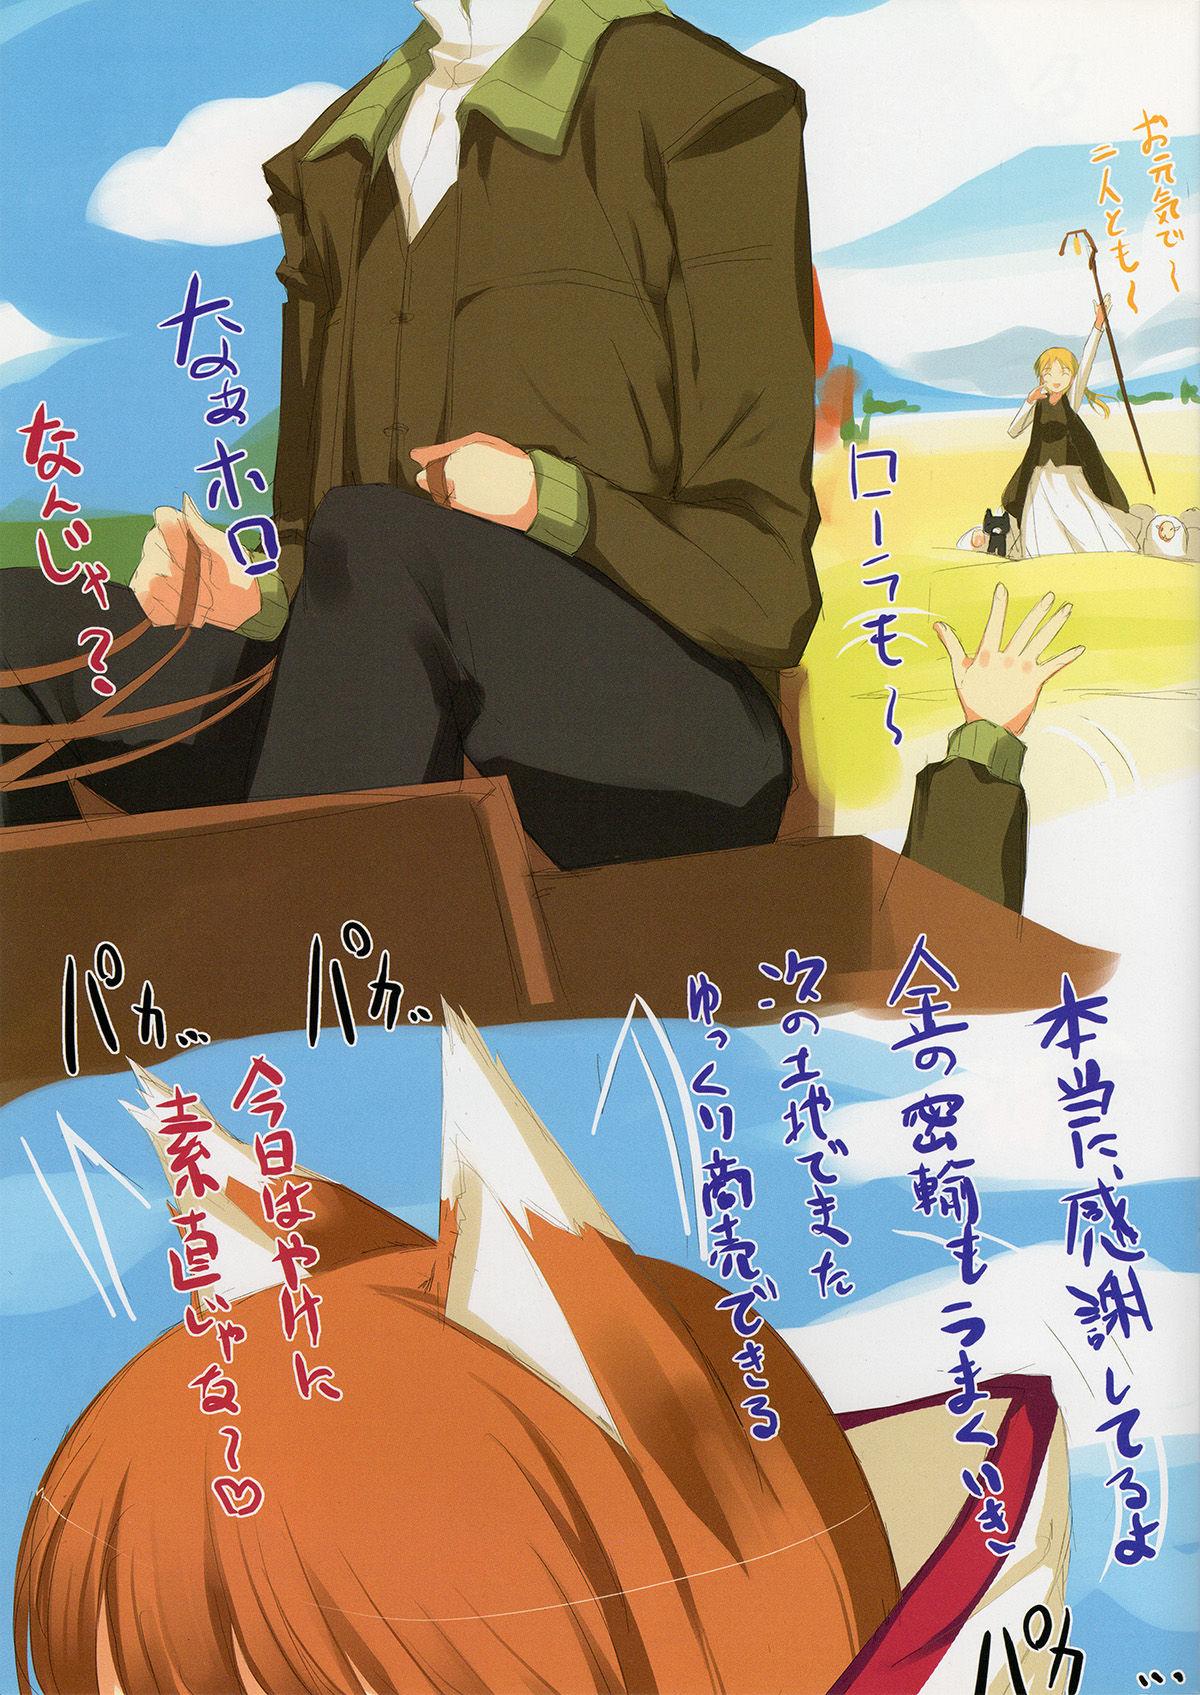 Ikillitts Ookami no Kimagure Hon - Spice and wolf Village - Page 2